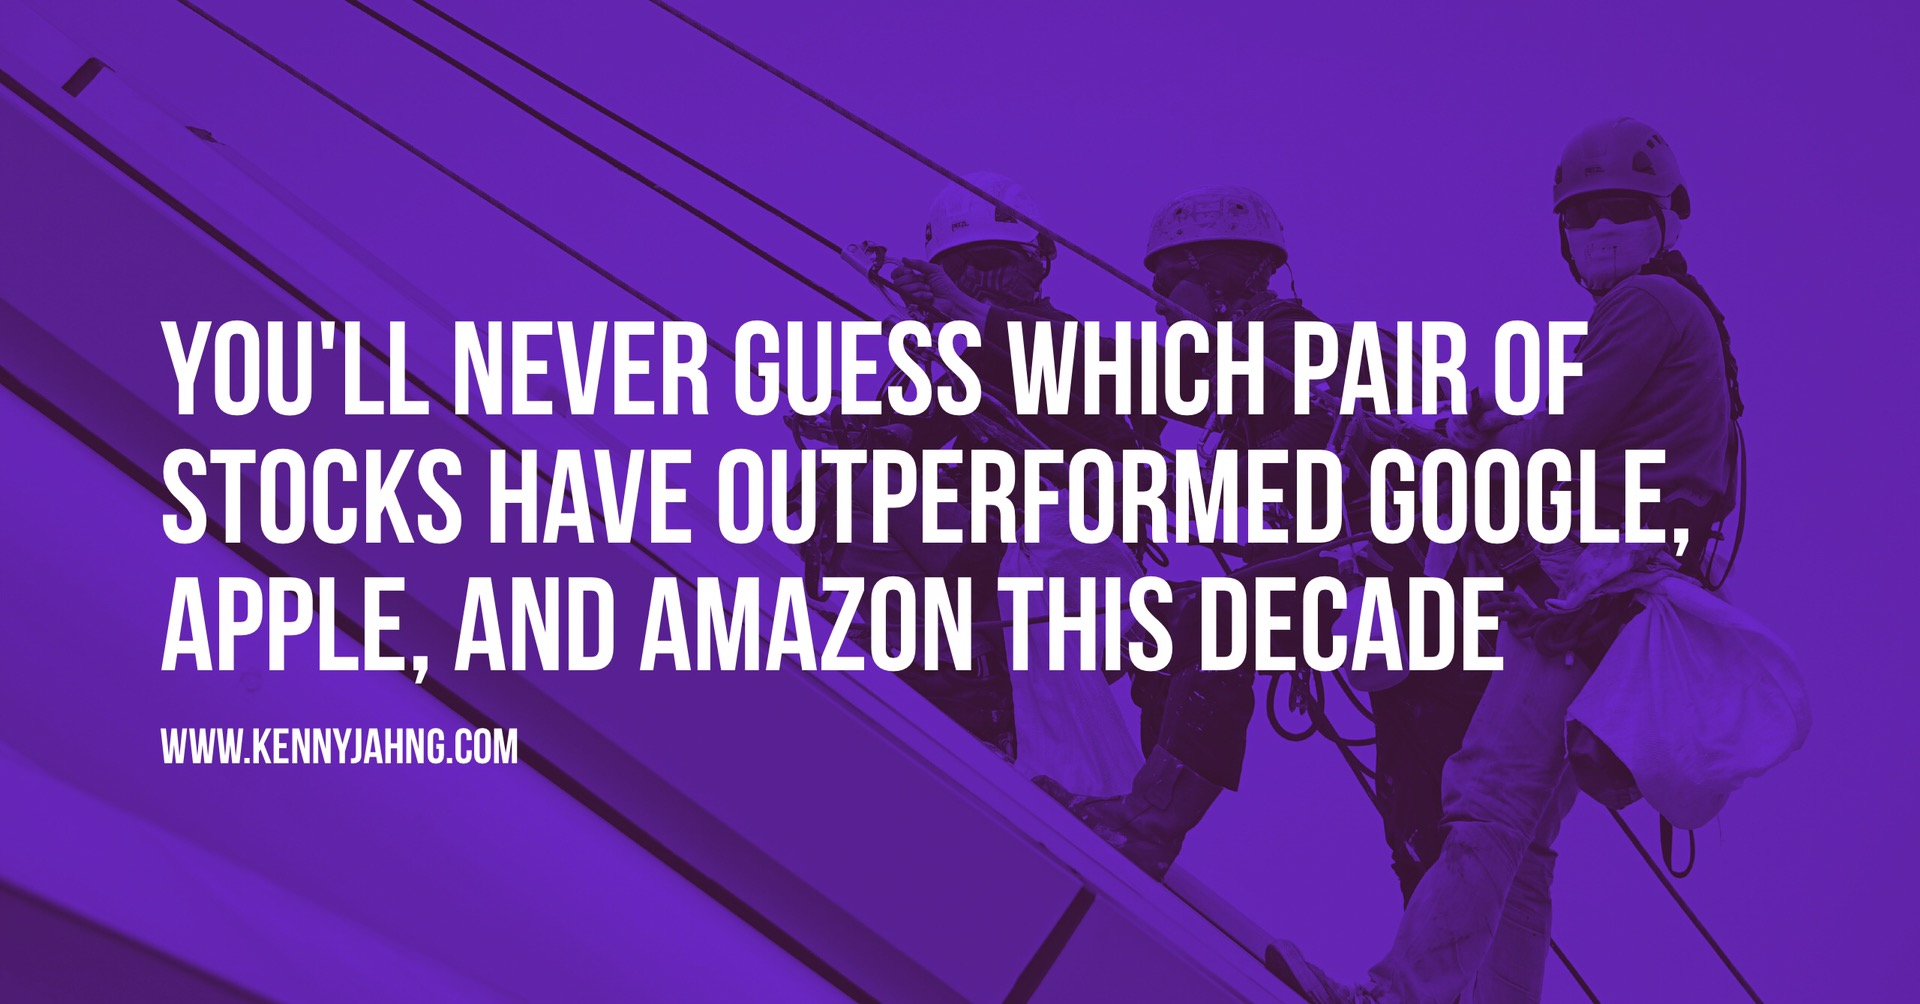 You’ll Never Guess Which Pair of Stocks Have Outperformed Google, Apple, and Amazon This Decade